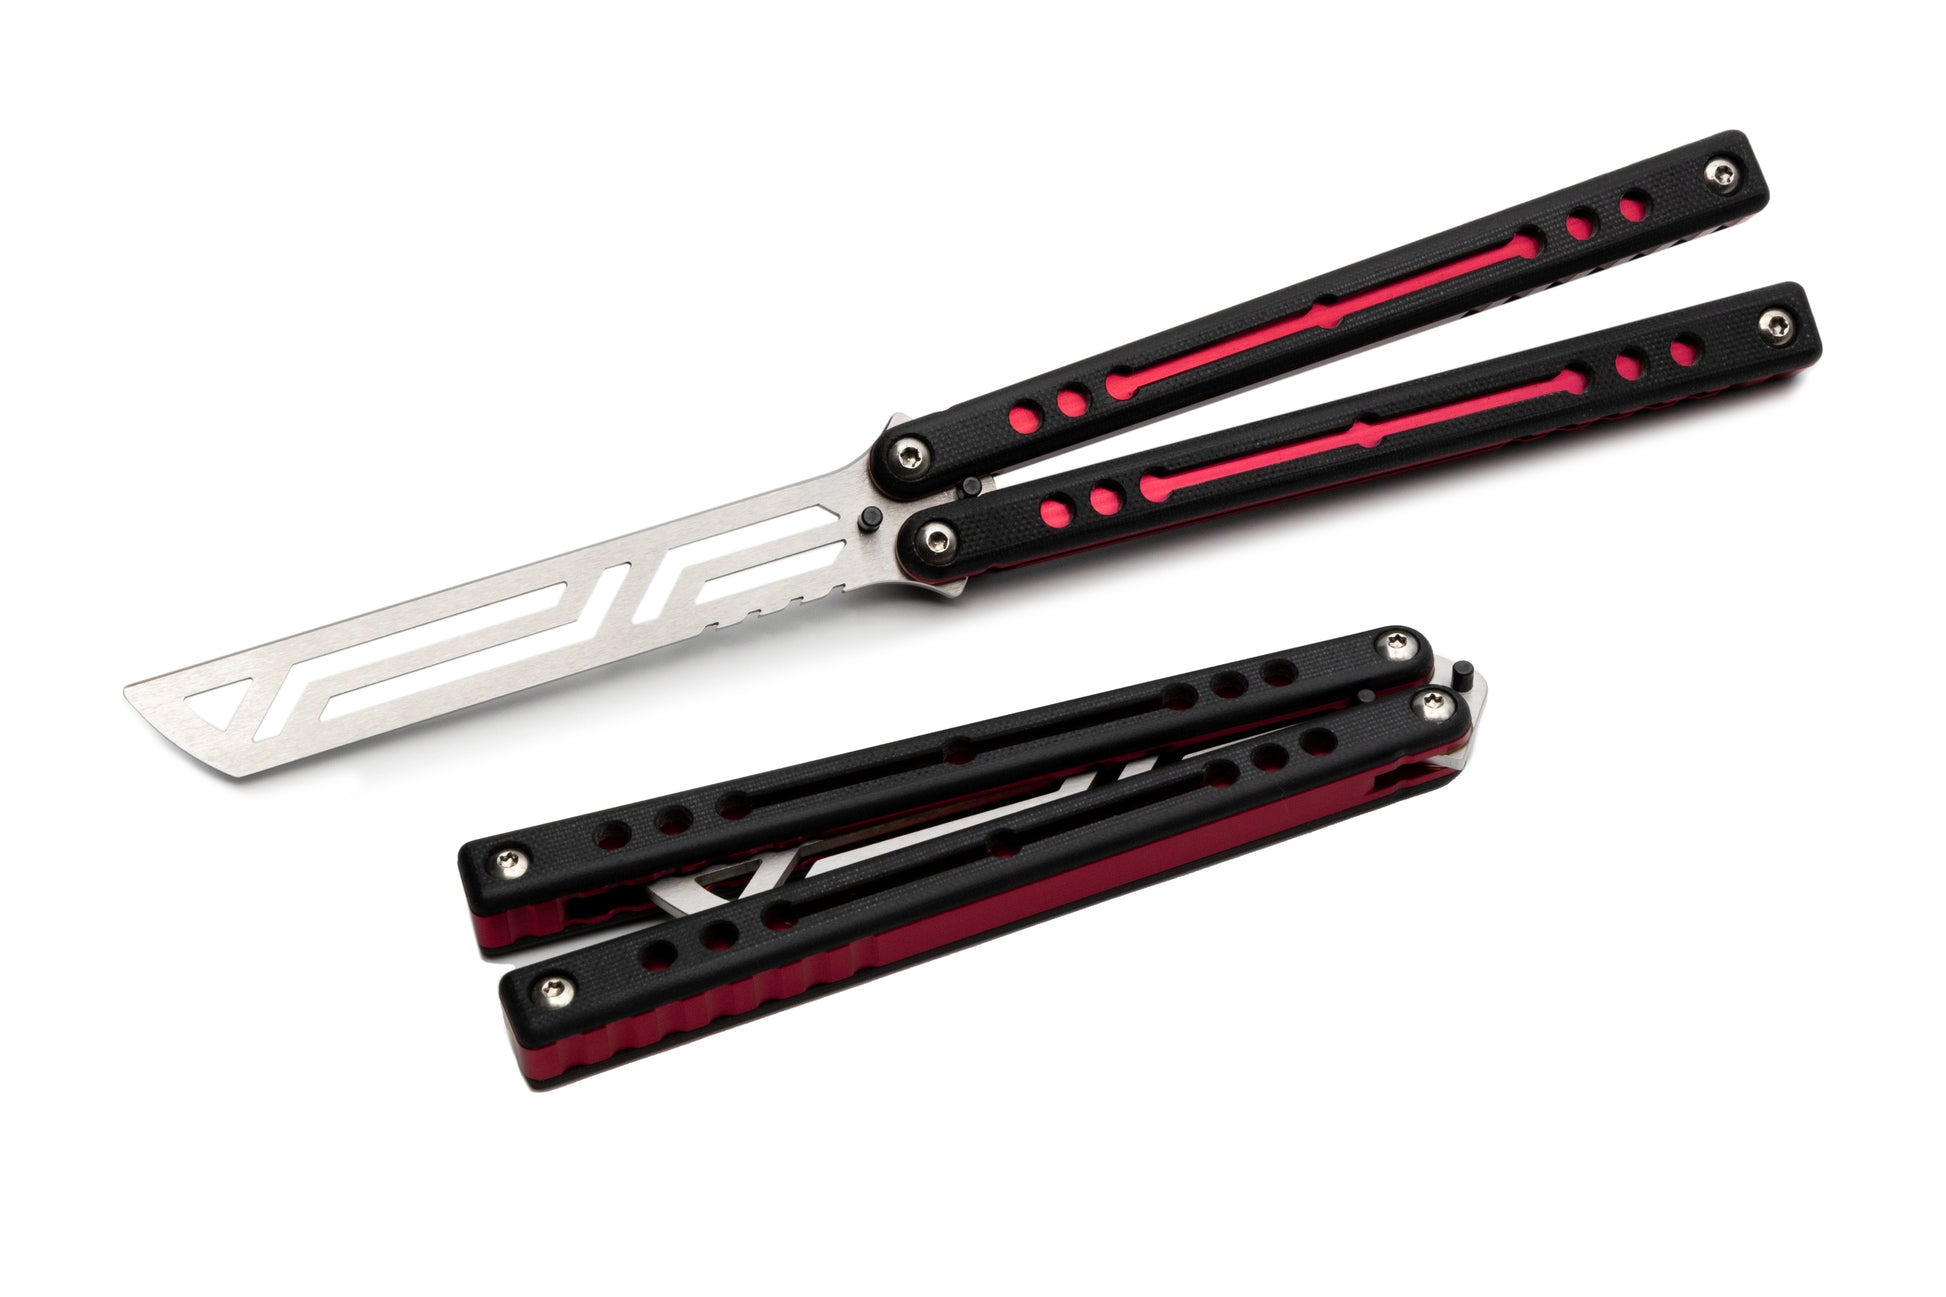 Red NautilusV2 balisong with g10 scales